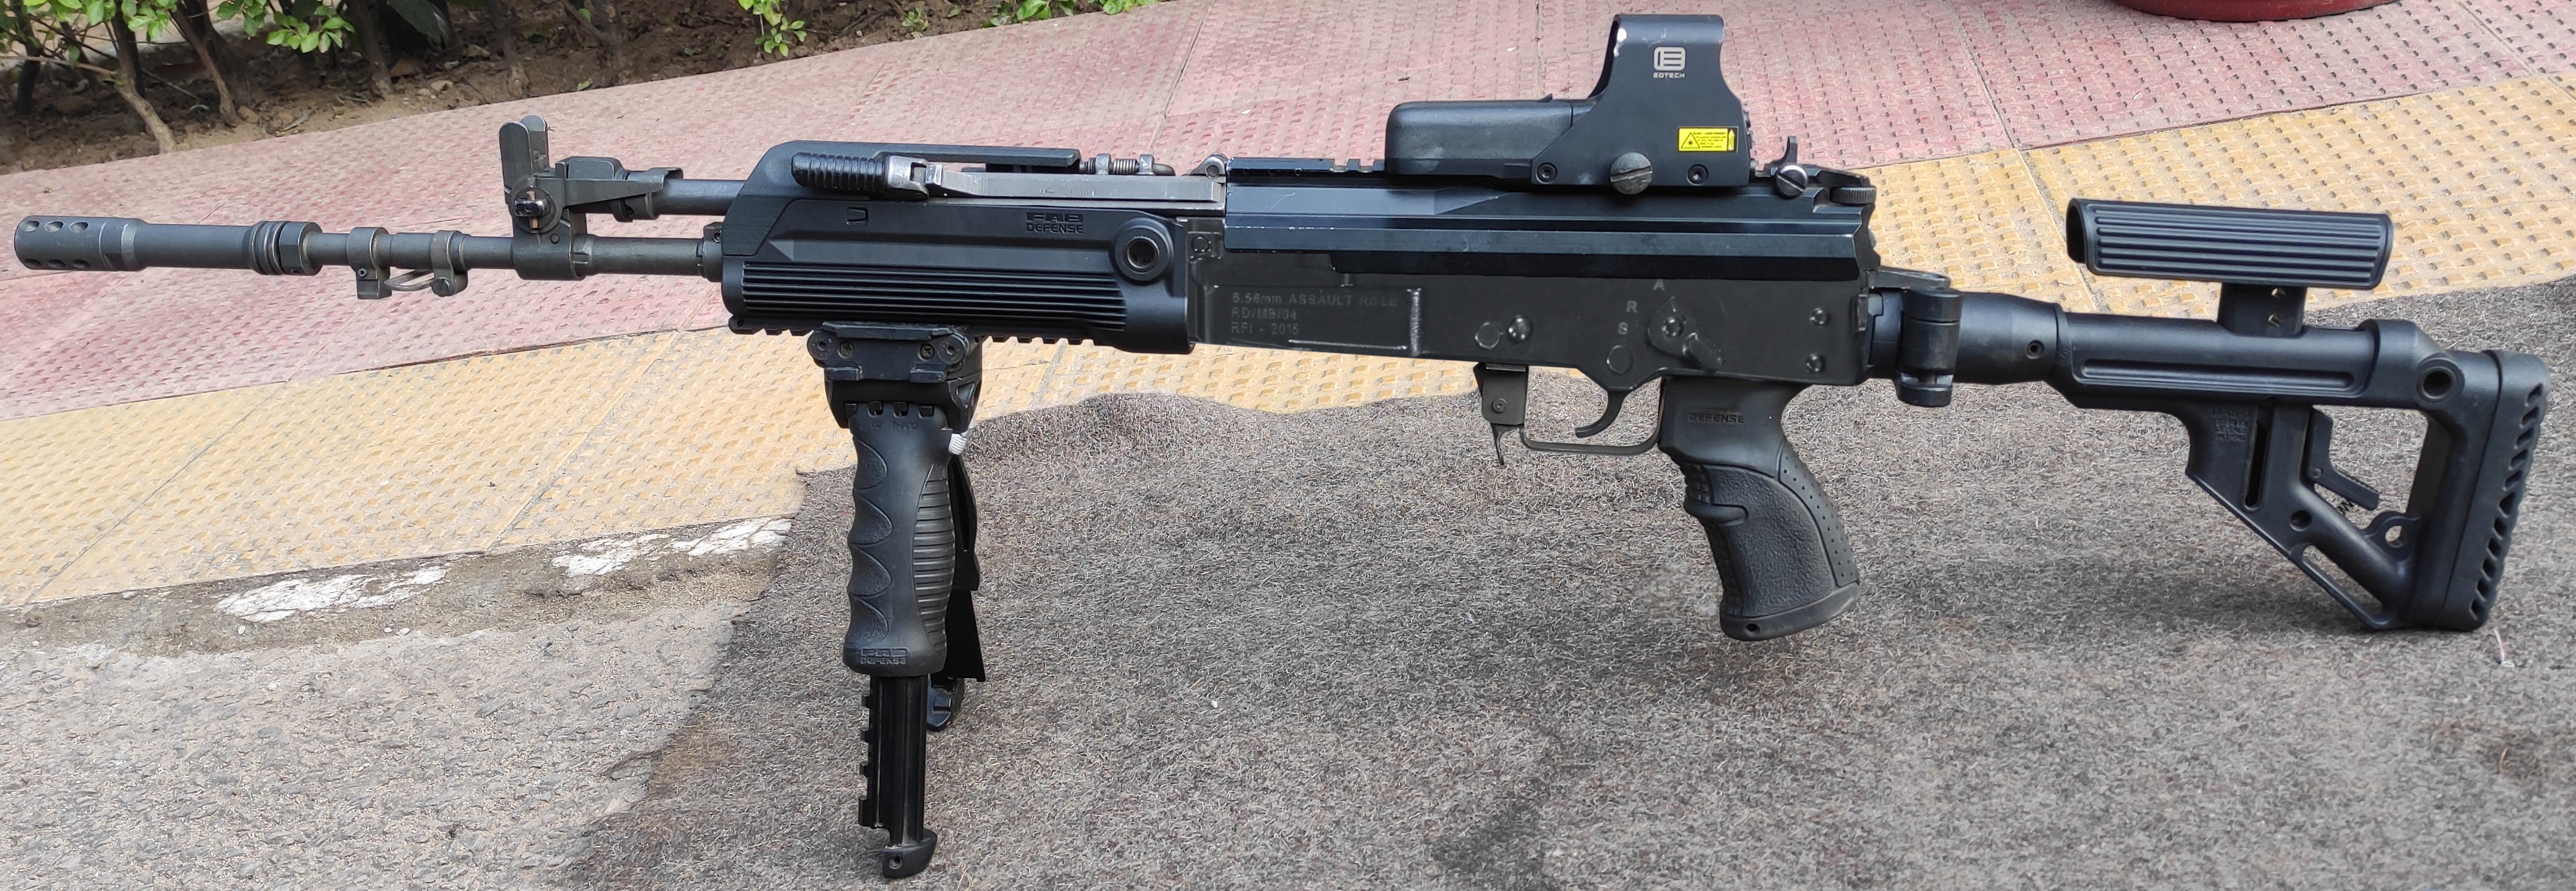 Upgraded INSAS build with Mk1C milled receiver.jpg